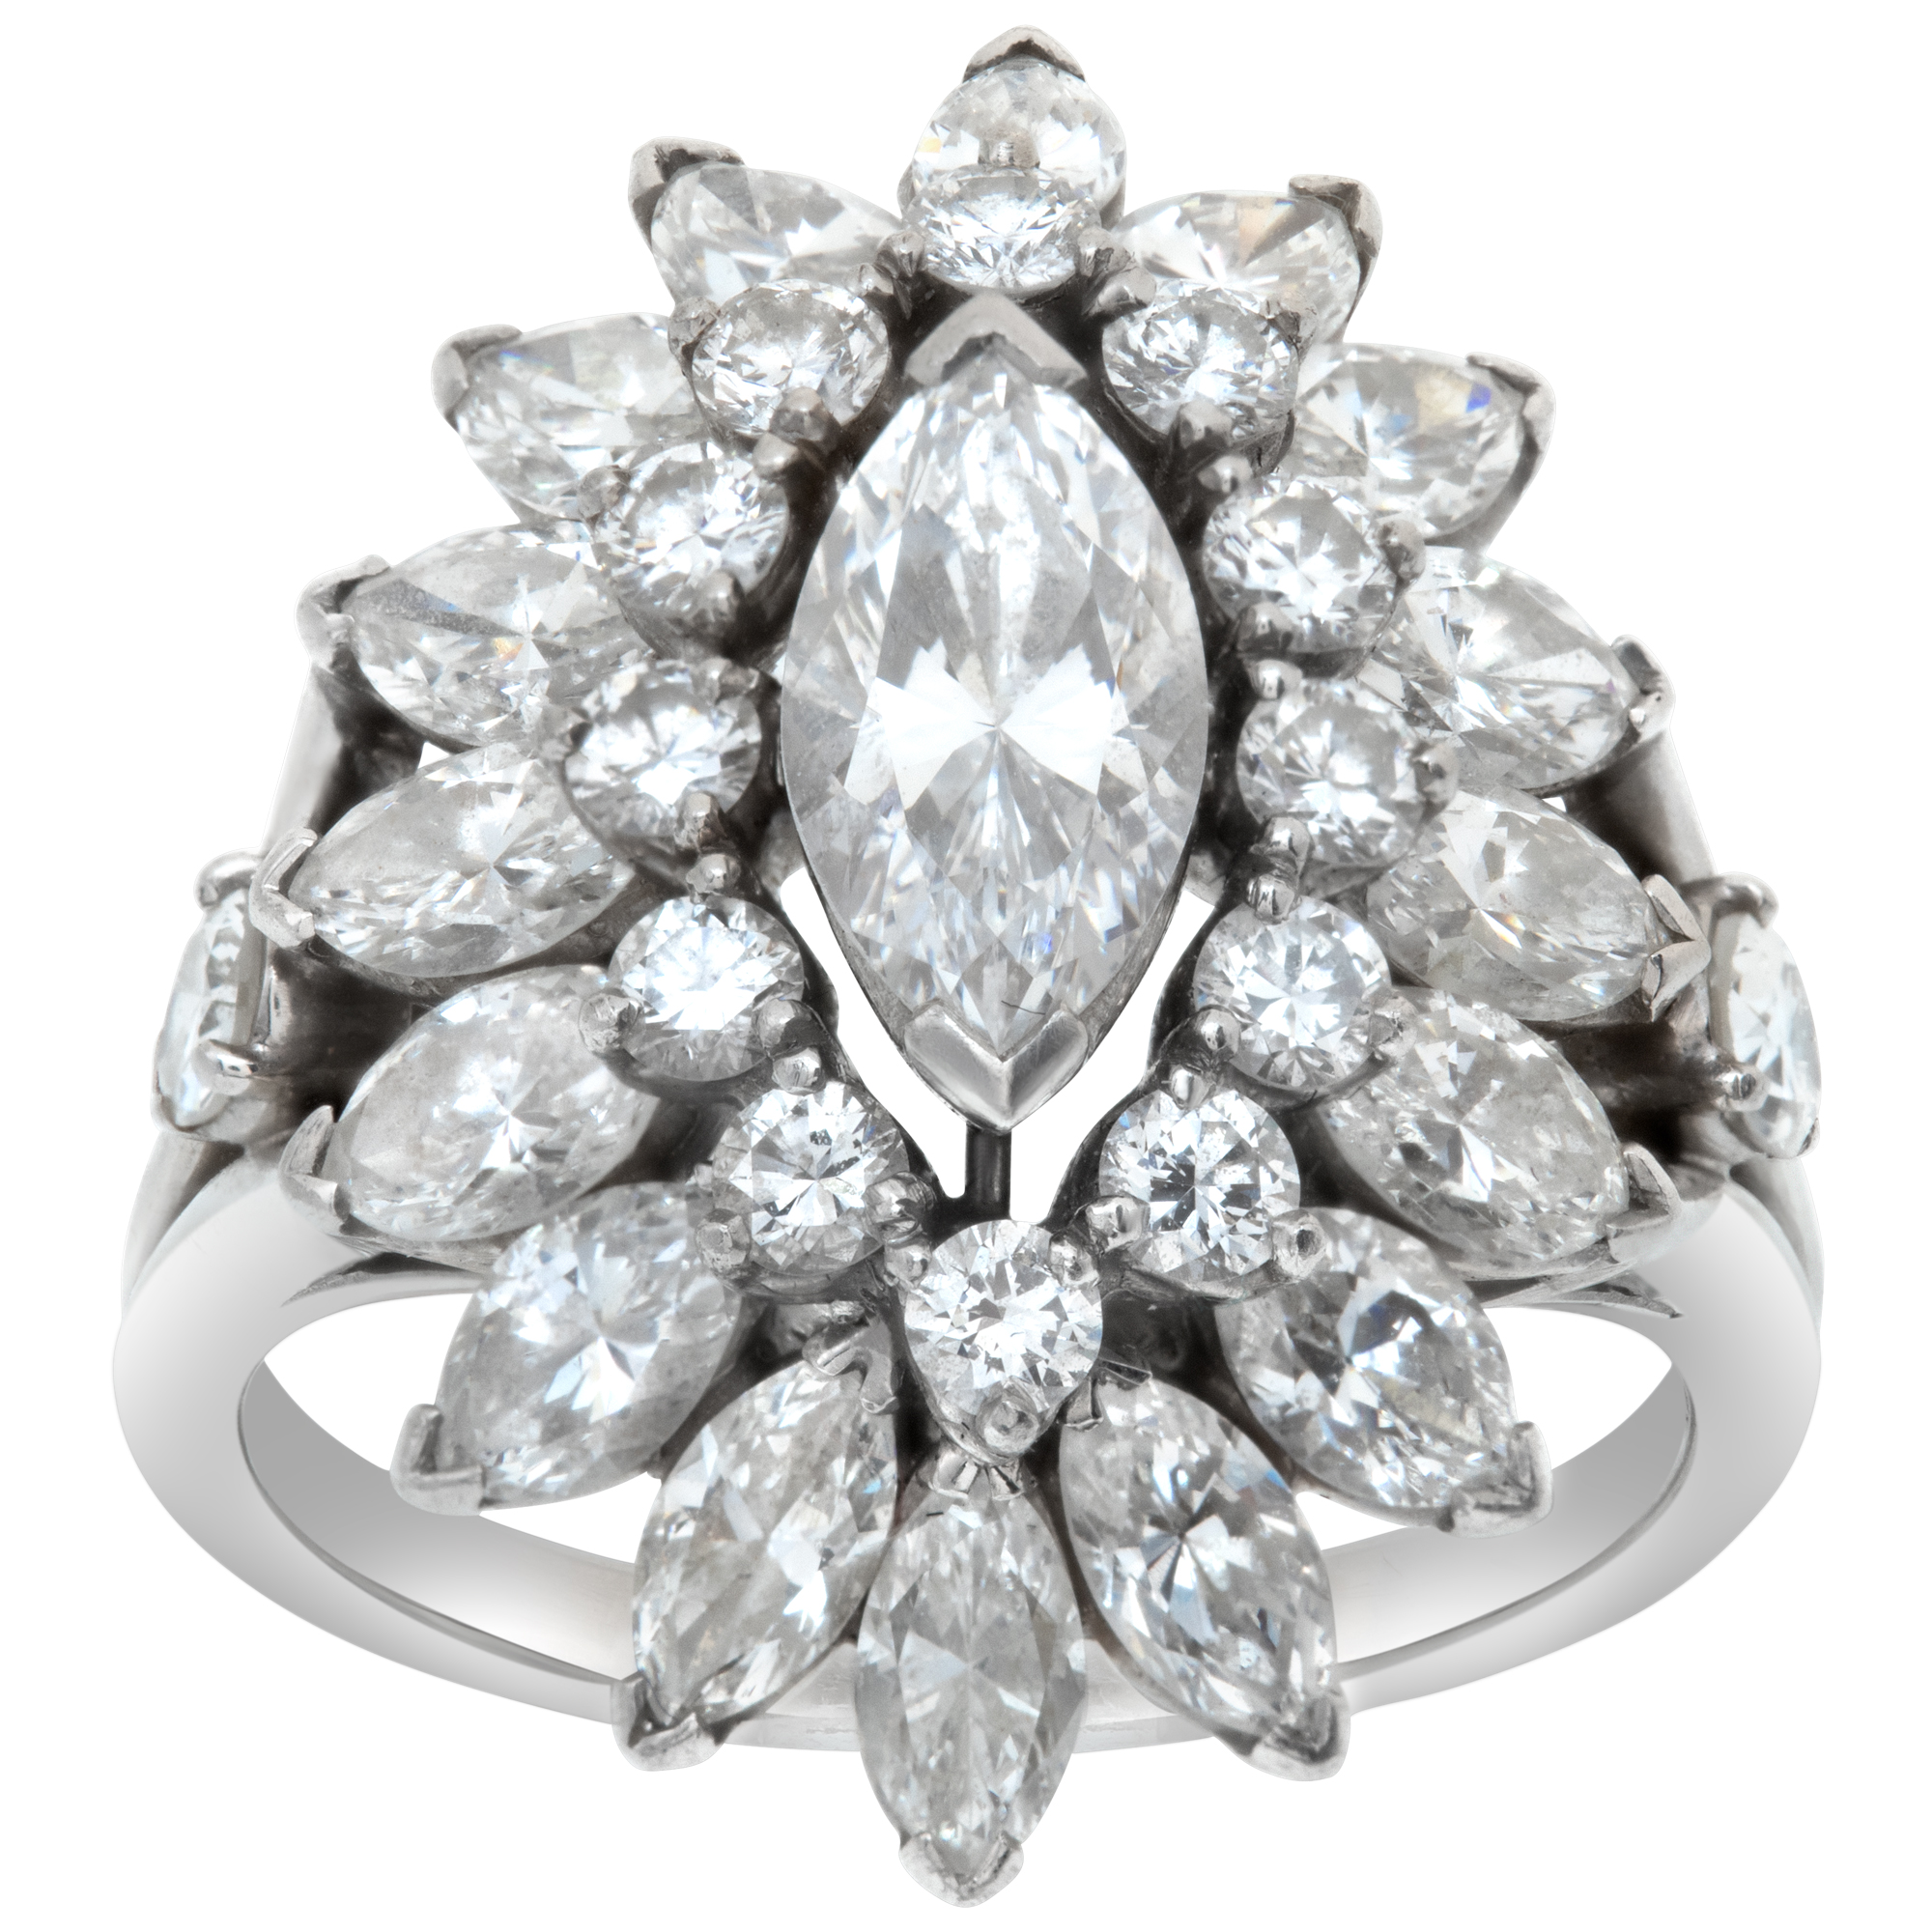 Marquise & round brilliant cut diamonds "Ballerina" ring set in platinum (over 3.75 carats approx. total weight image 1